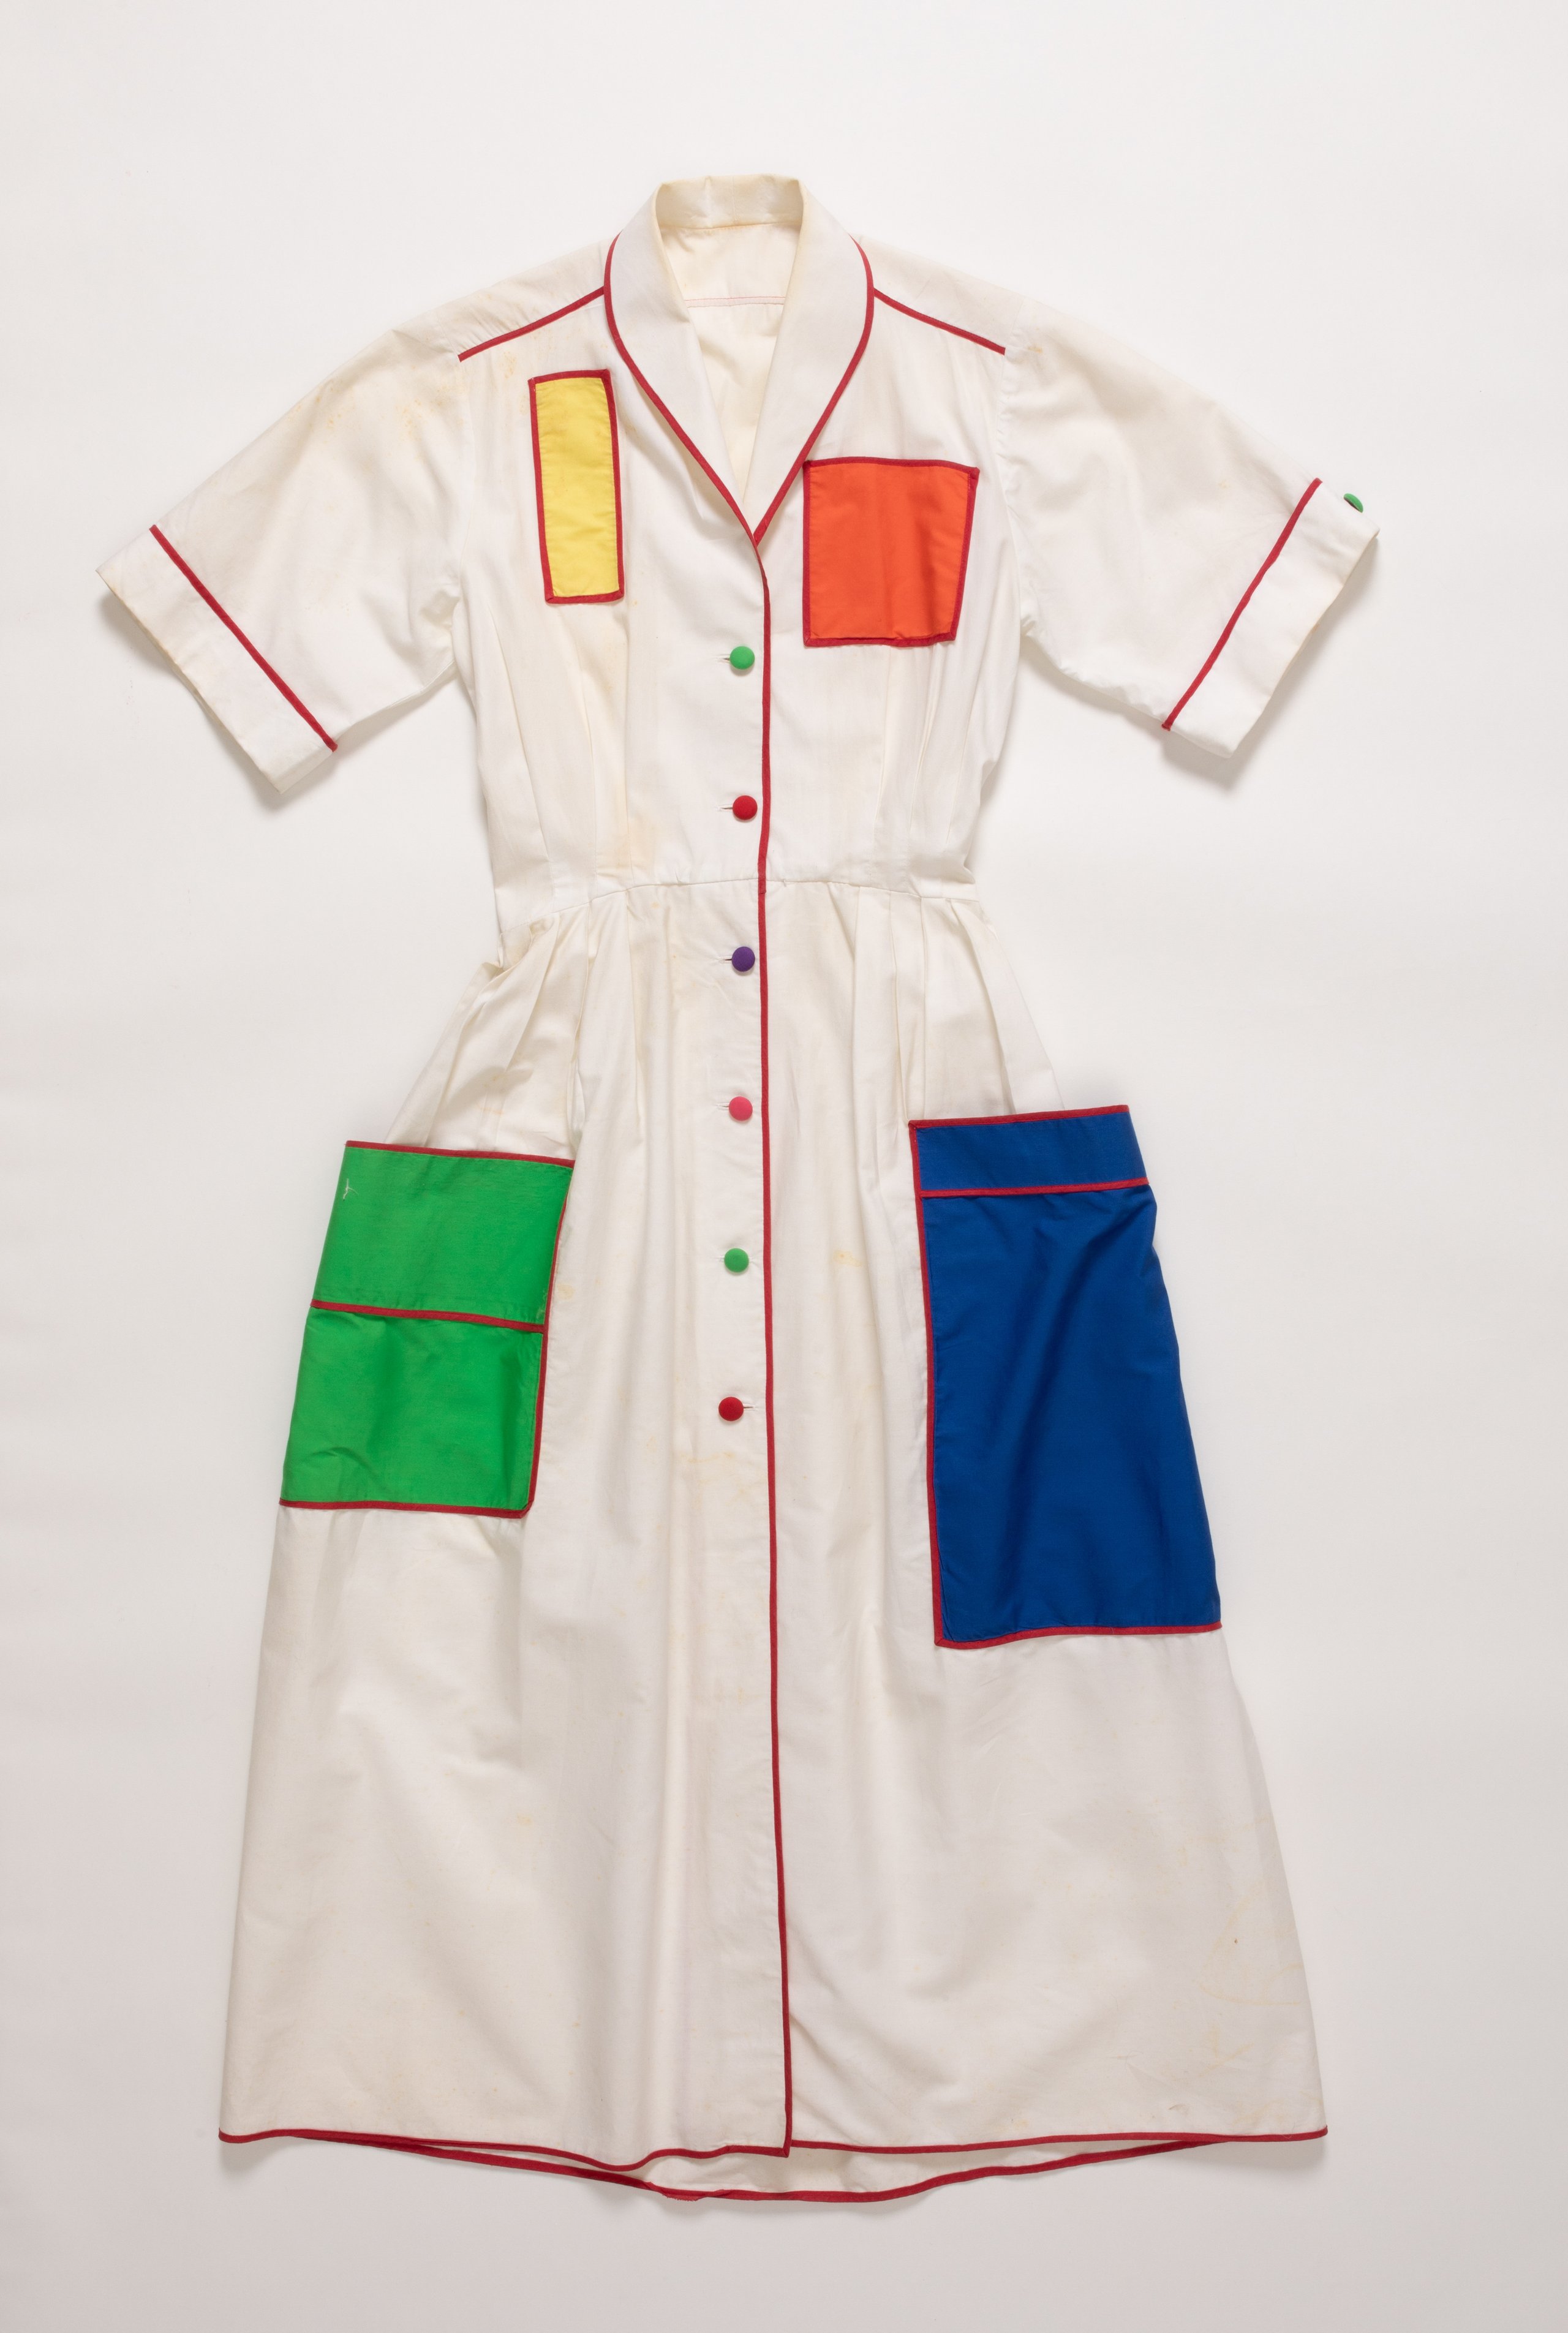 'Mondrian' outfit by Linda Jackson and Peter Tully